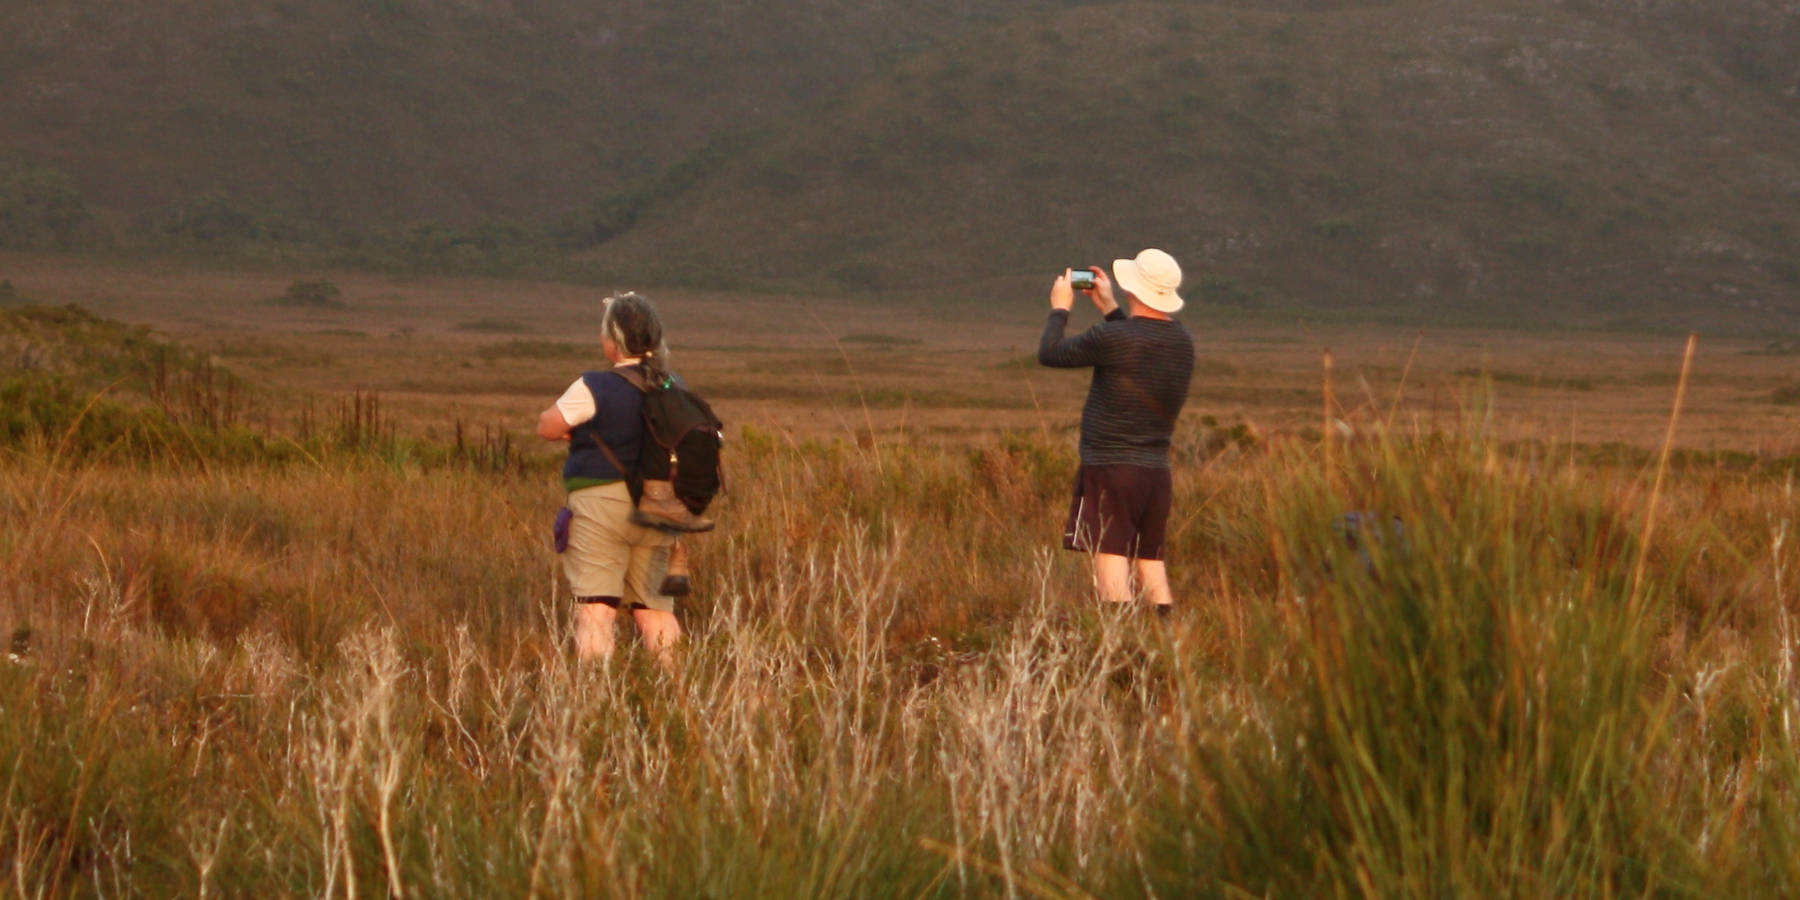 ‘Team Melaleuca’ carry out Where? Where? Wedgie! in the World Heritage Area, southern Tasmania. Standing in buttongrass with a mountain in the distance, they survey the area with binoculars. Photo: Persia Brooks.